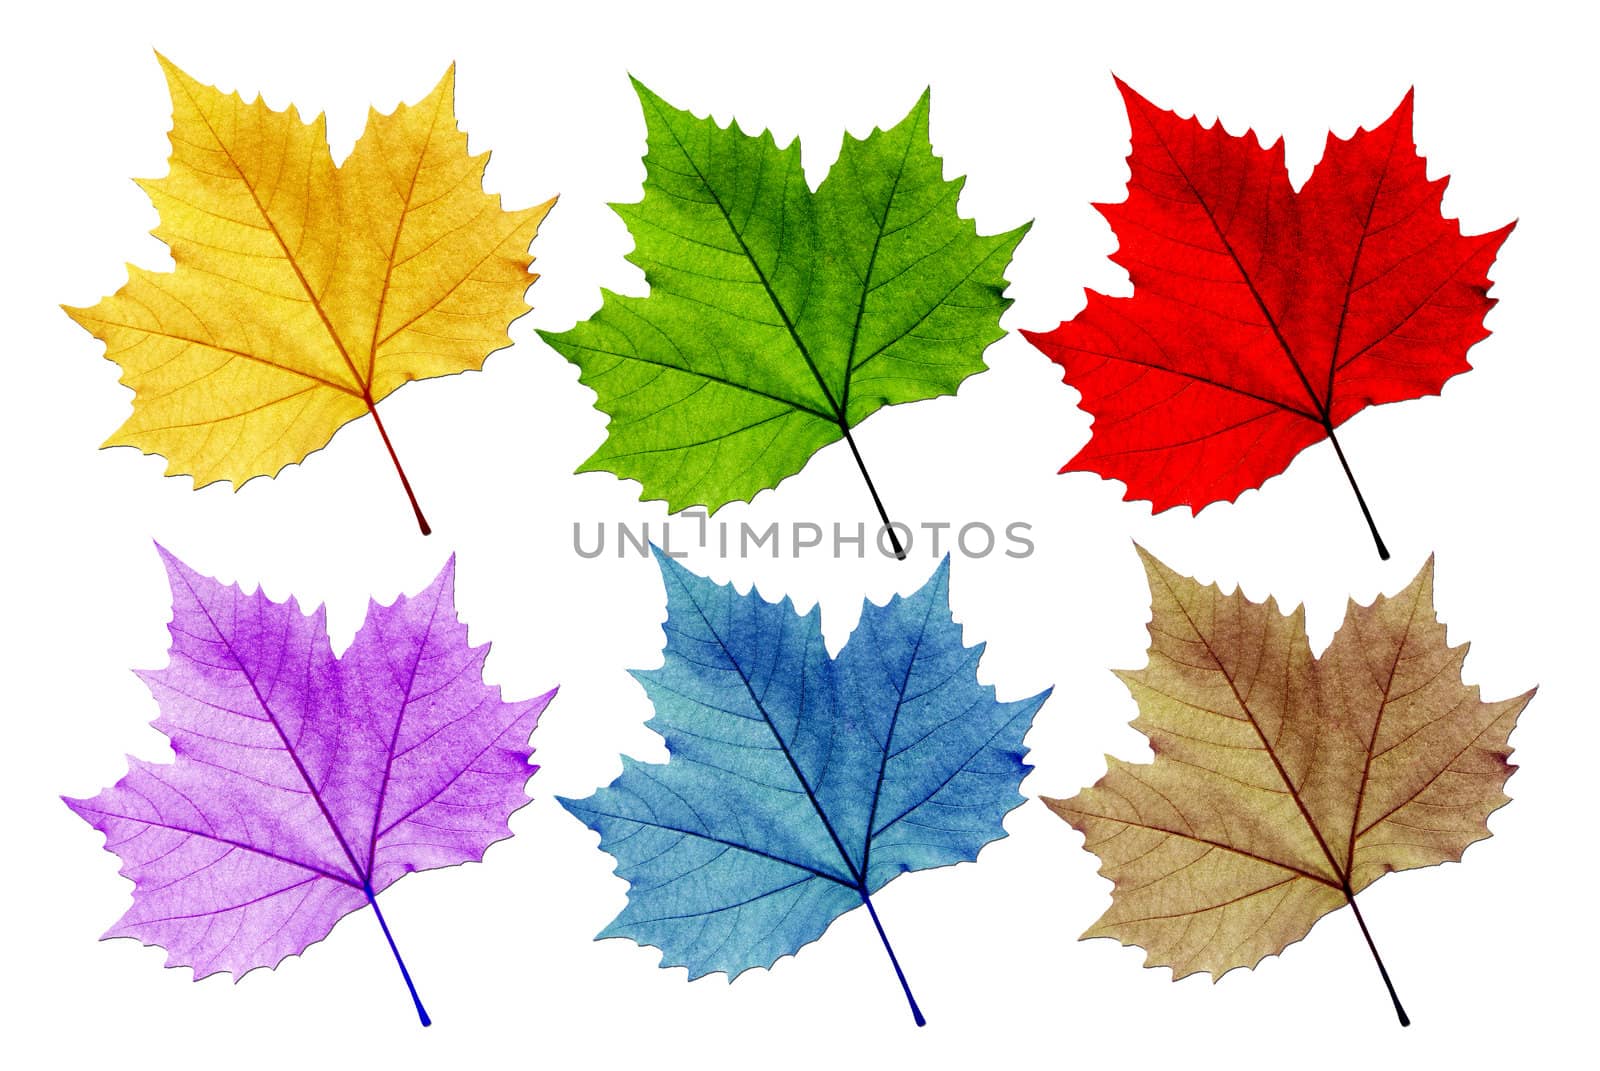 Leaves vary in color. White background. Distinguished, with the leaves